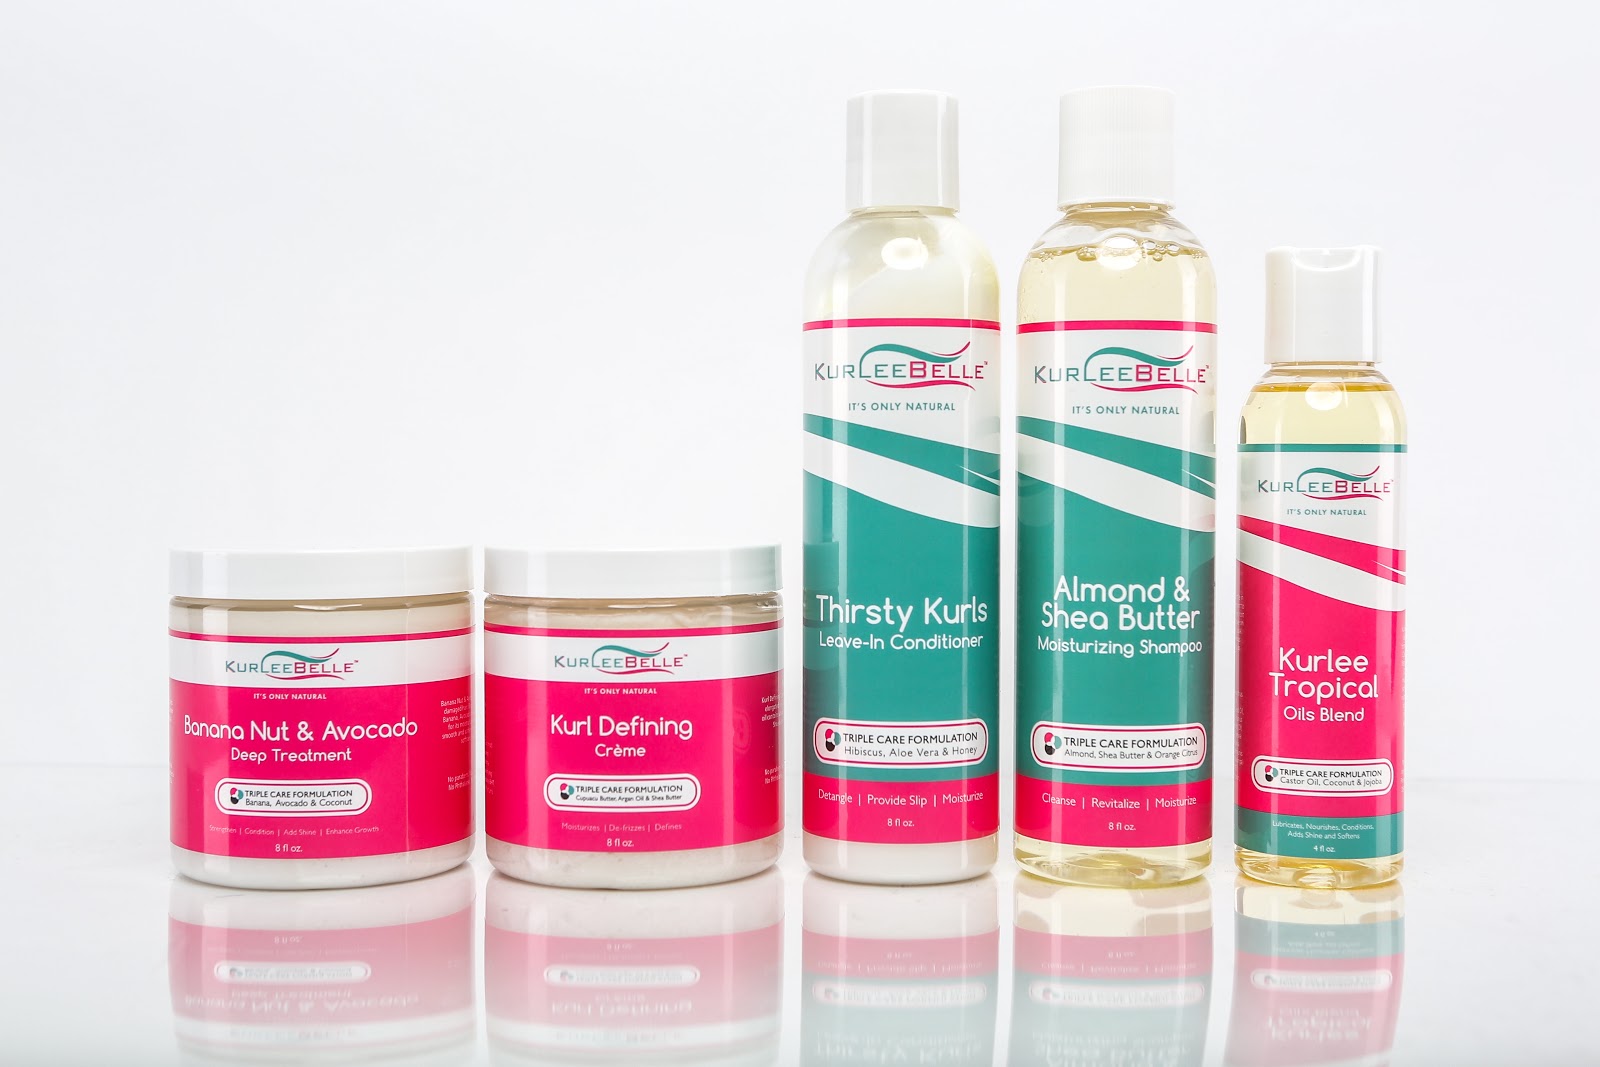 Kurlee Belle Launches Natural Hair Care Product Line